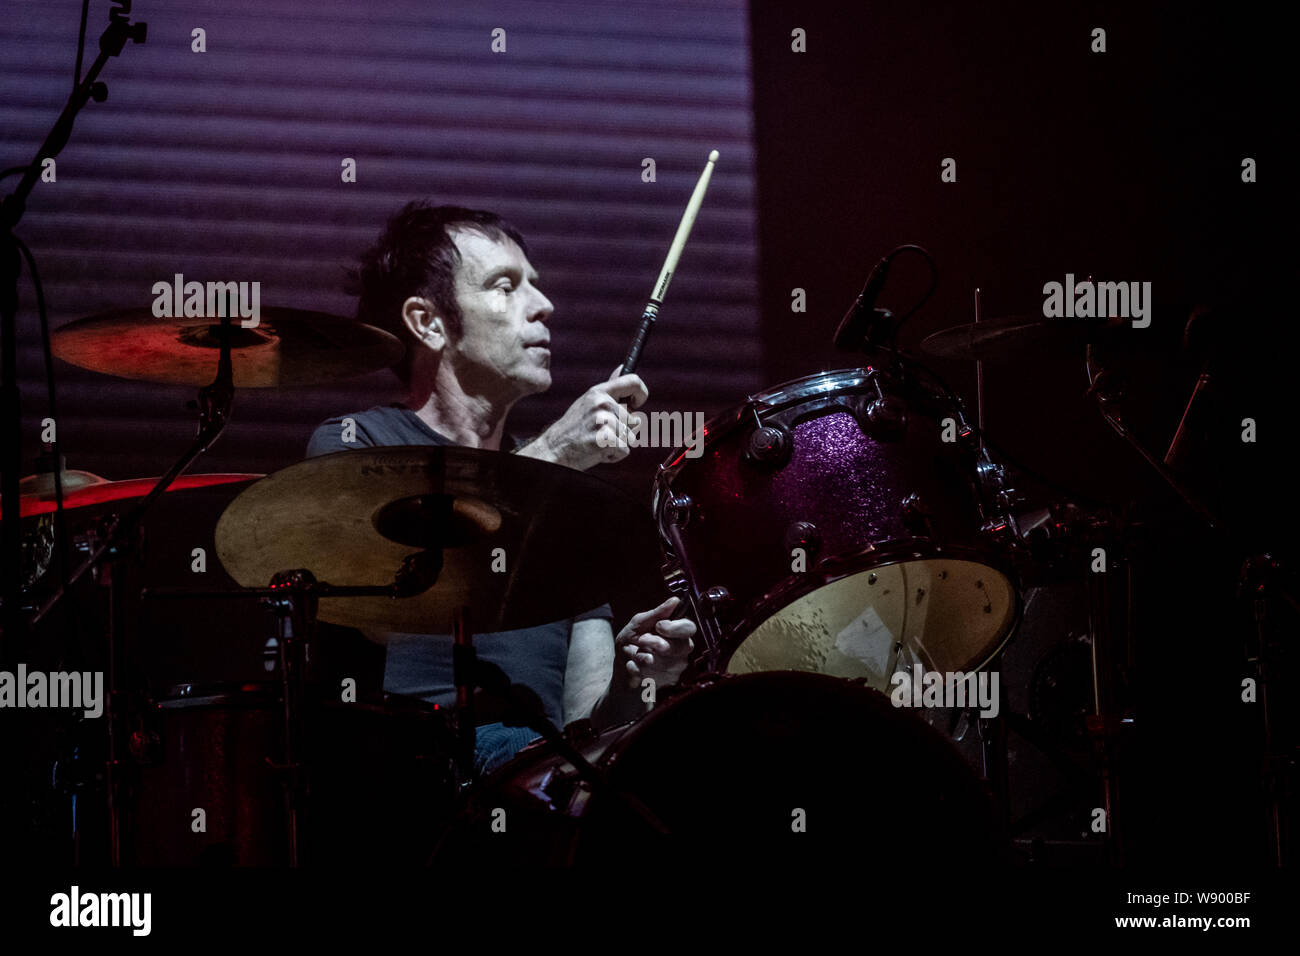 Skanderborg, Denmark. 10th, August 2019. The English rock band Suede performs a live concert during the Danish music festival SmukFest 2019 in Skanderborg. Here drummer Simon Gilbert is seen live on stage. (Photo credit: Gonzales Photo - Kim M. Leland). Stock Photo